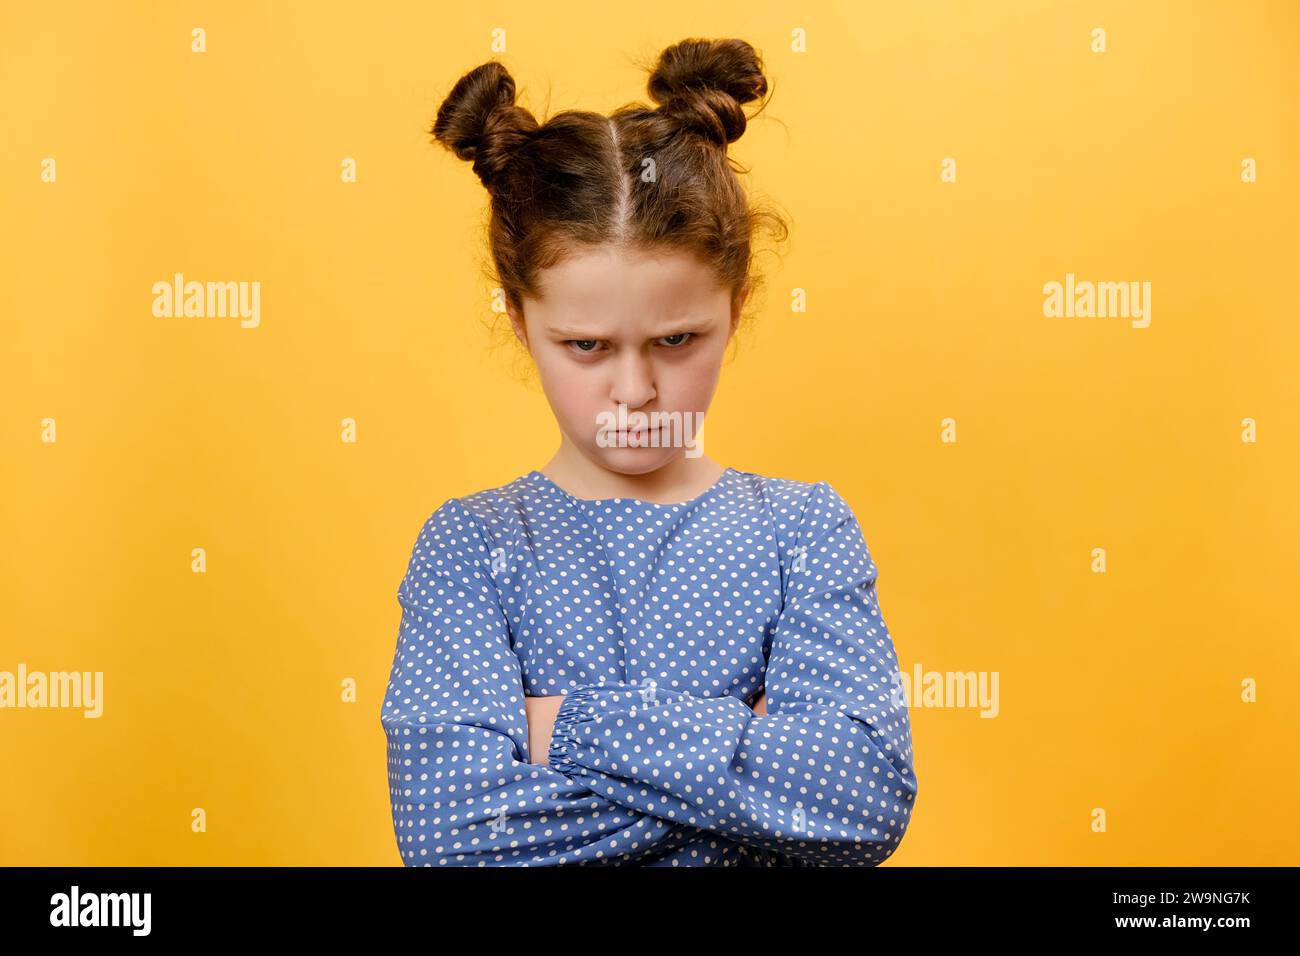 Portrait of grumpy preteen girl child pouting lips, grimacing and looking angrily at camera, posing isolated over plain yellow color background wall i Stock Photo